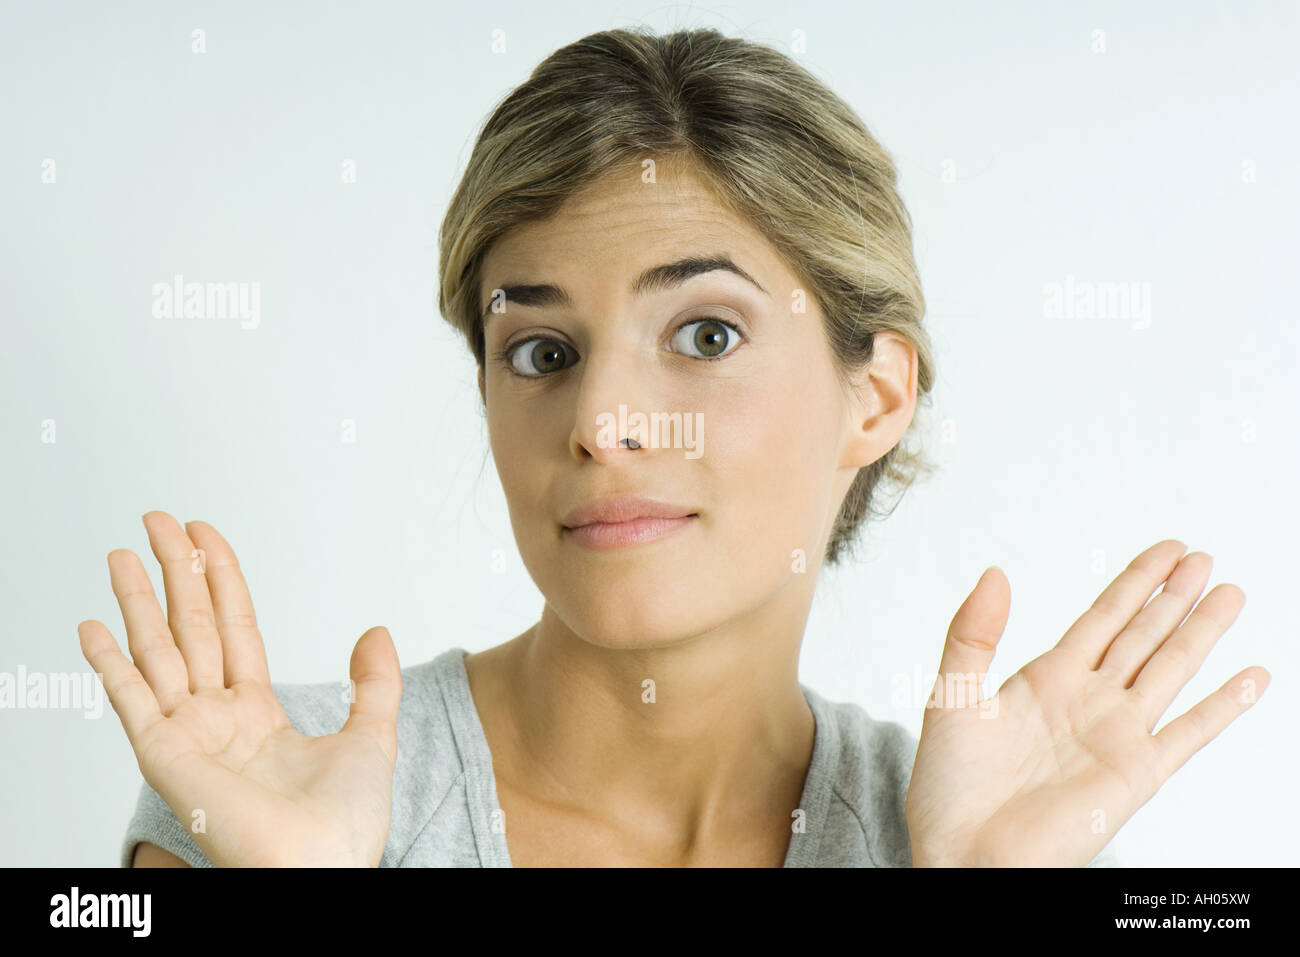 Young woman raising eyebrows, holding up palms, portrait Stock Photo